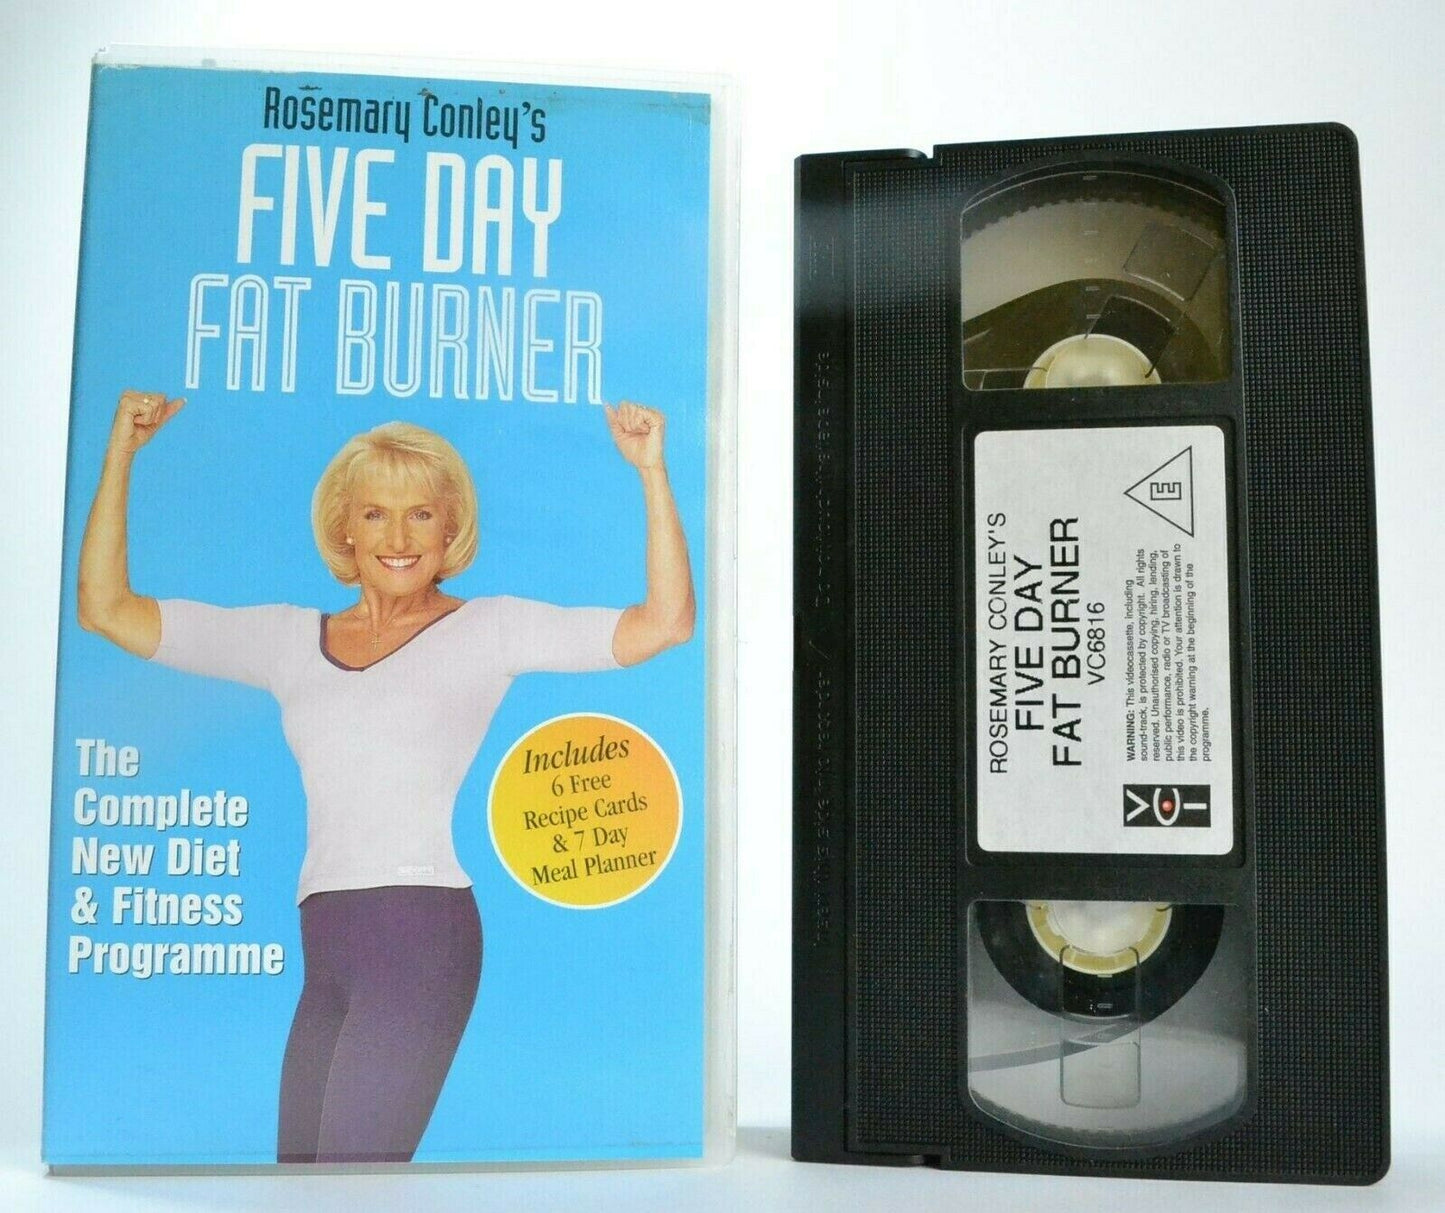 Five Day Fat Burner: By Rosemary Conley - Fitness Programme - New Diet - Pal VHS-